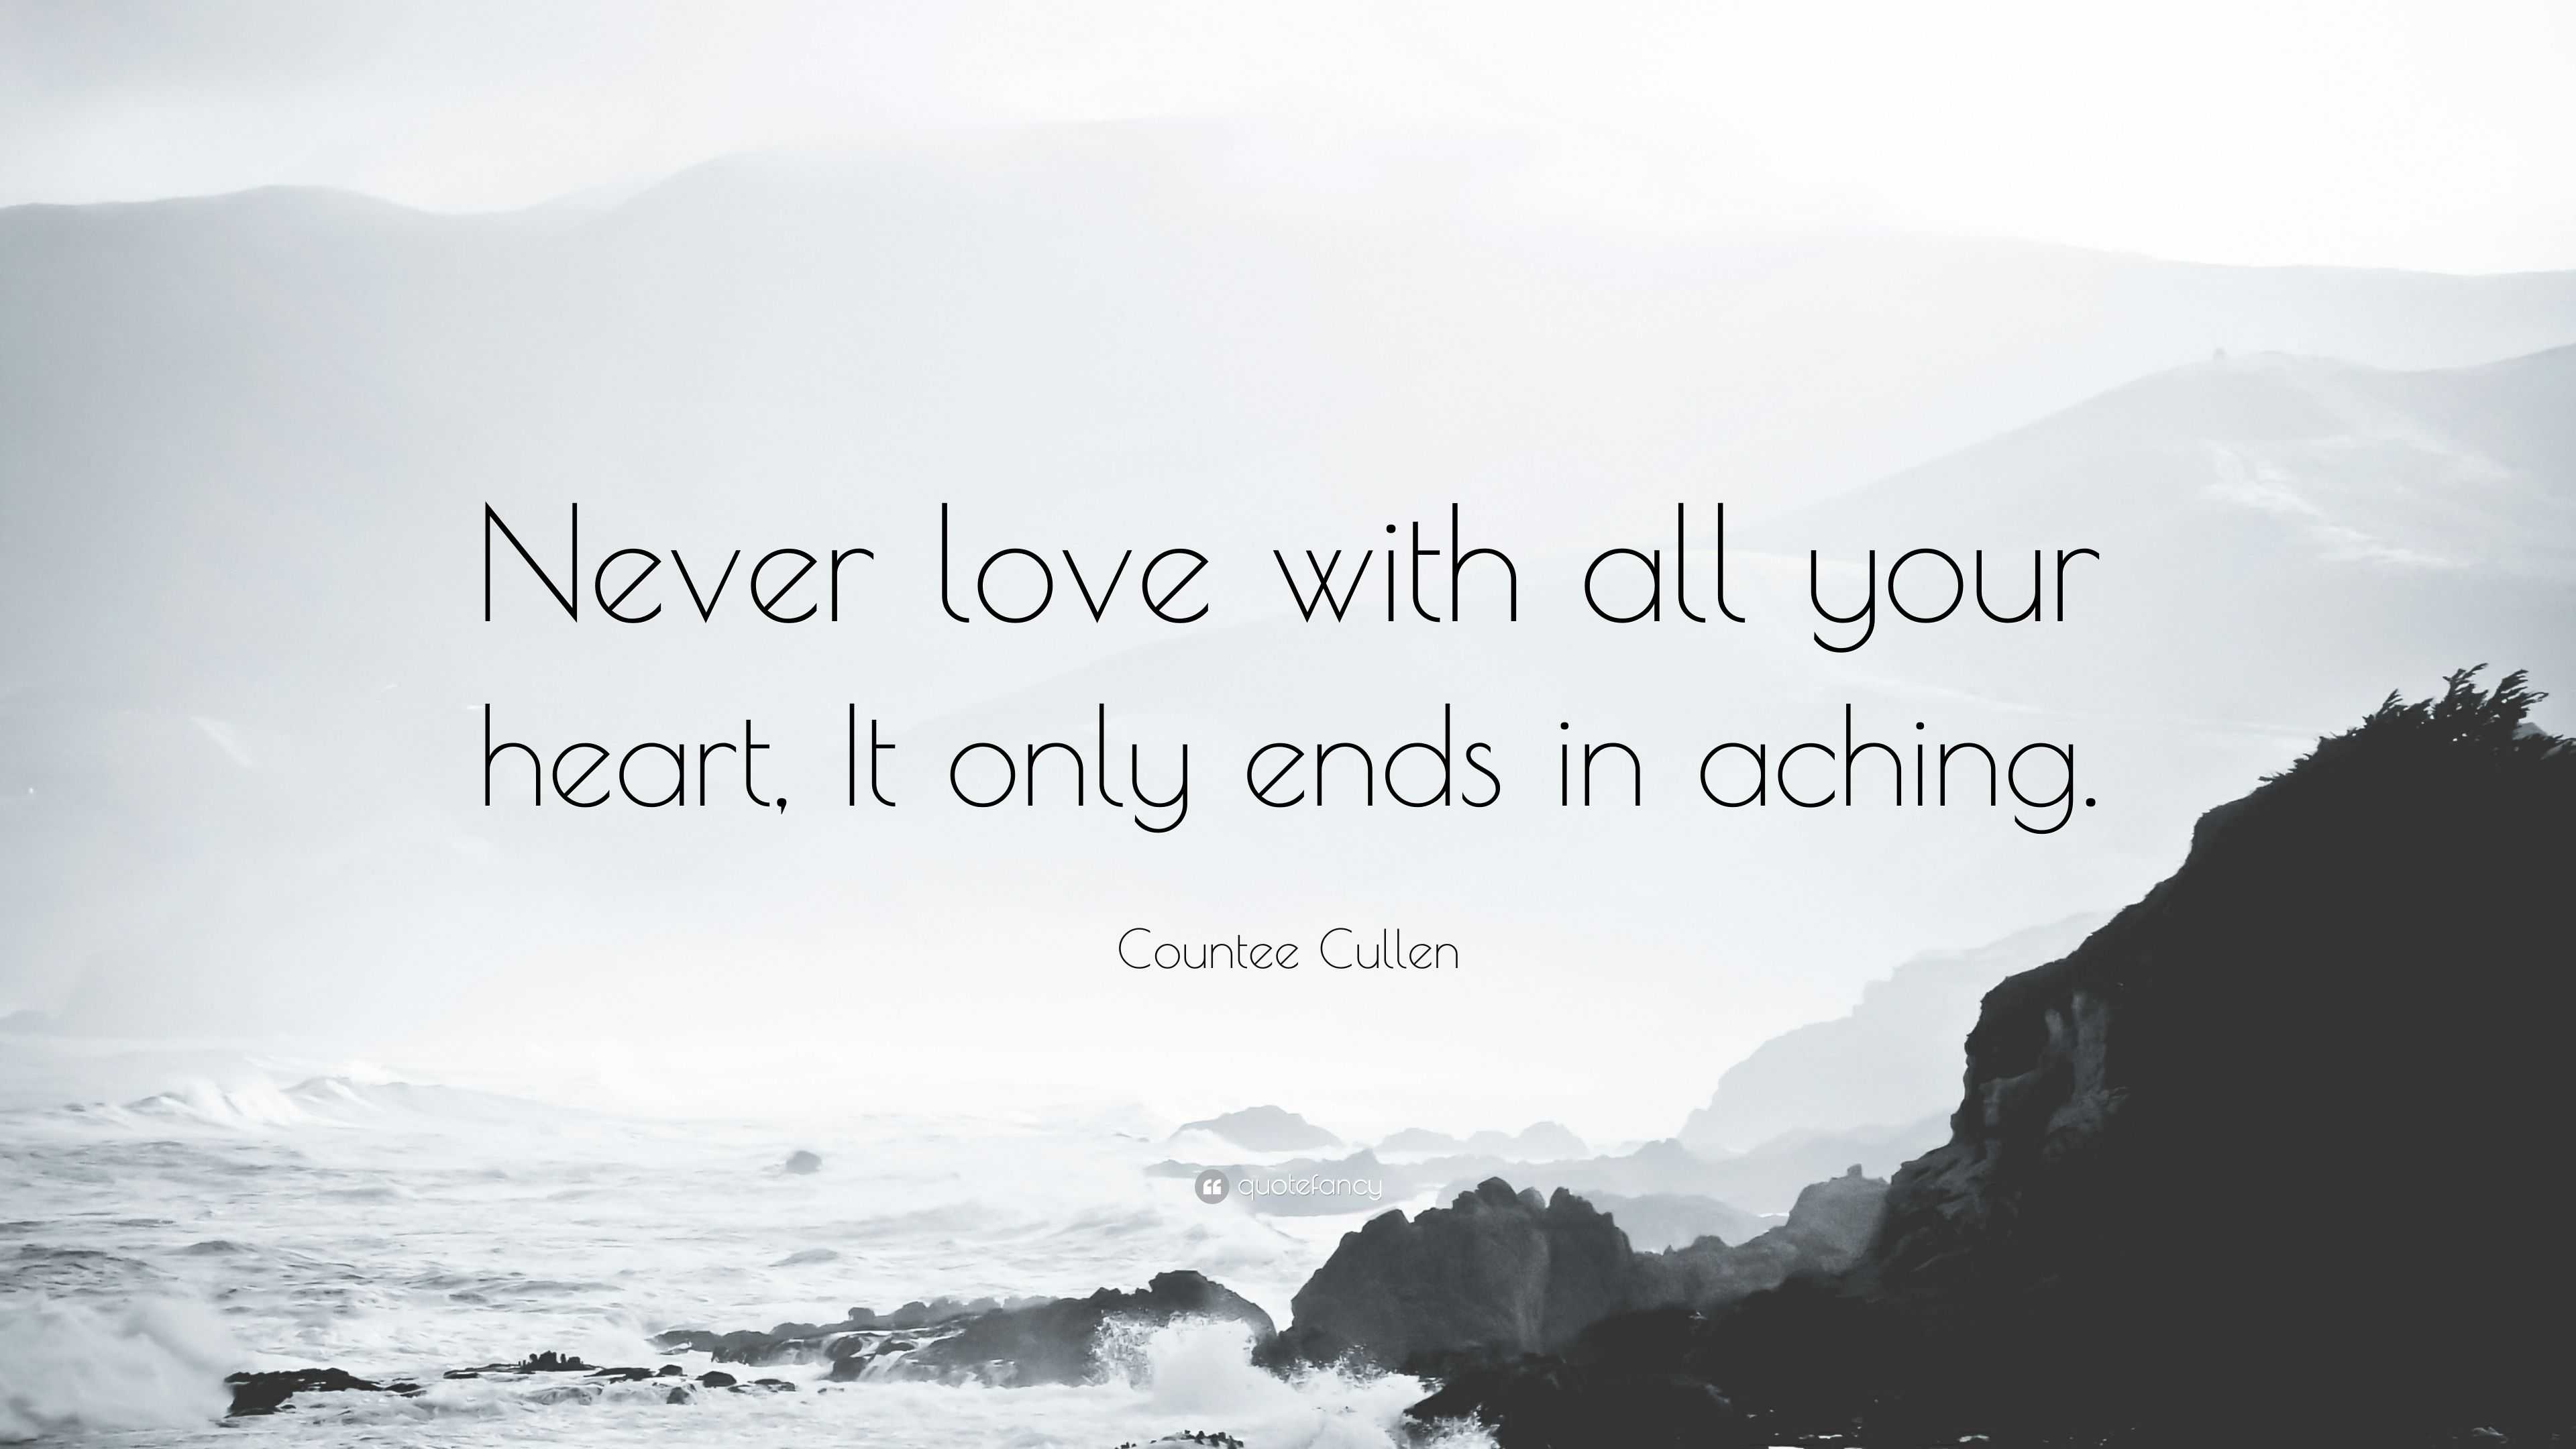 Countee Cullen Quote “Never love with all your heart It only ends in